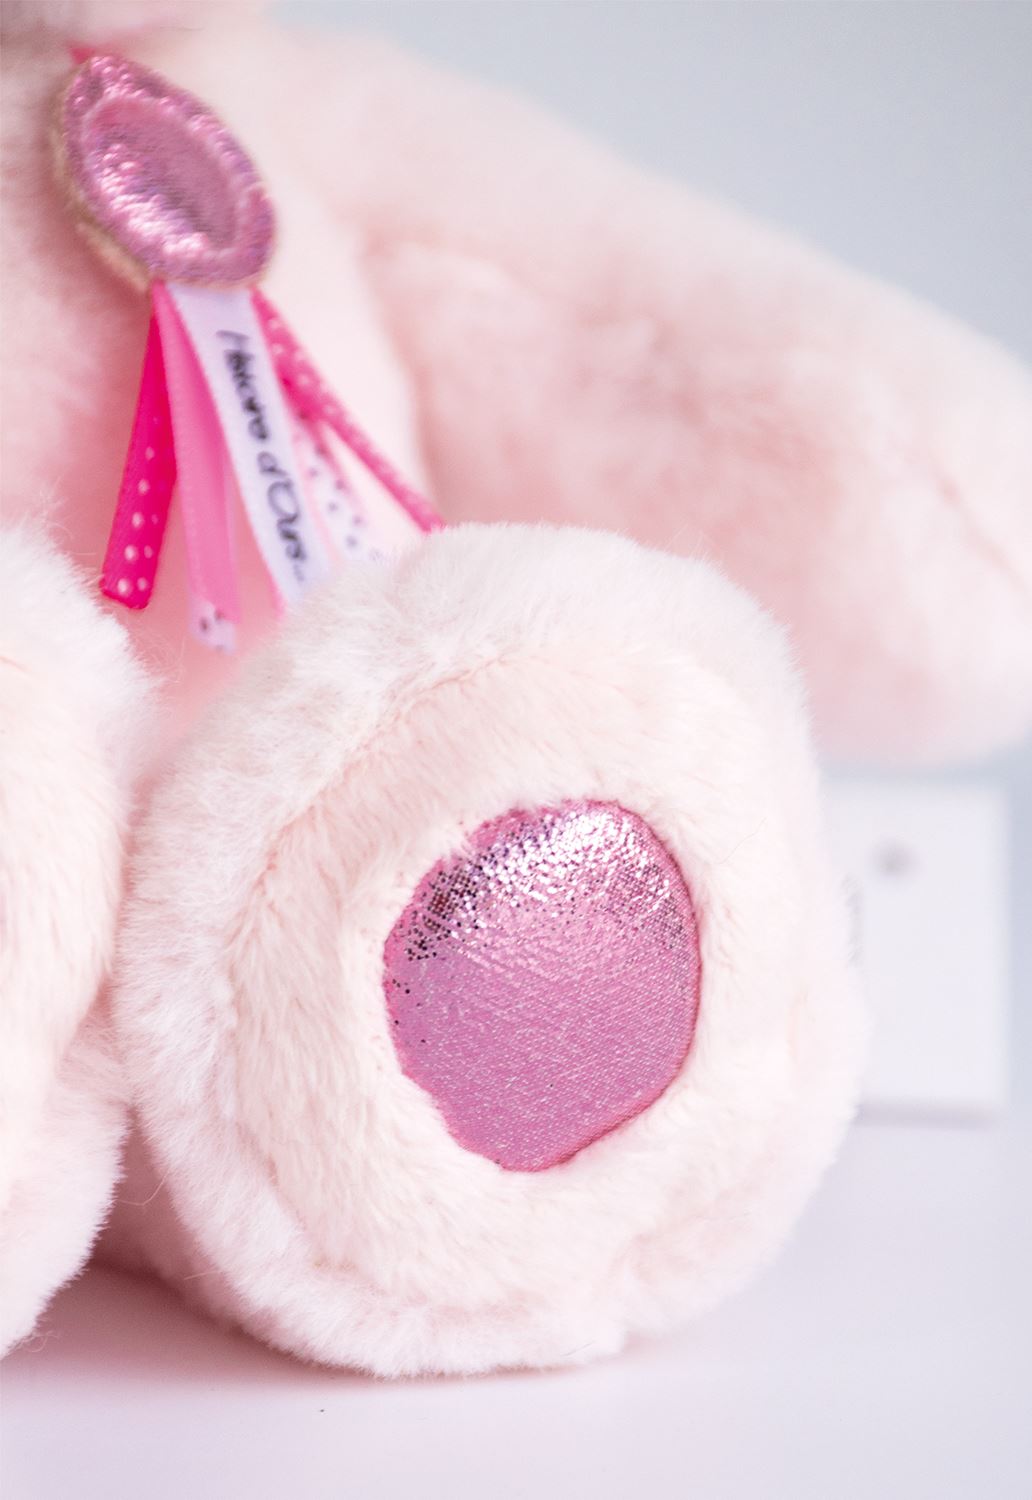 Doudou et Compagnie Histoire D'ours Teddy Bear Charms Pink Teddy Bear Charms